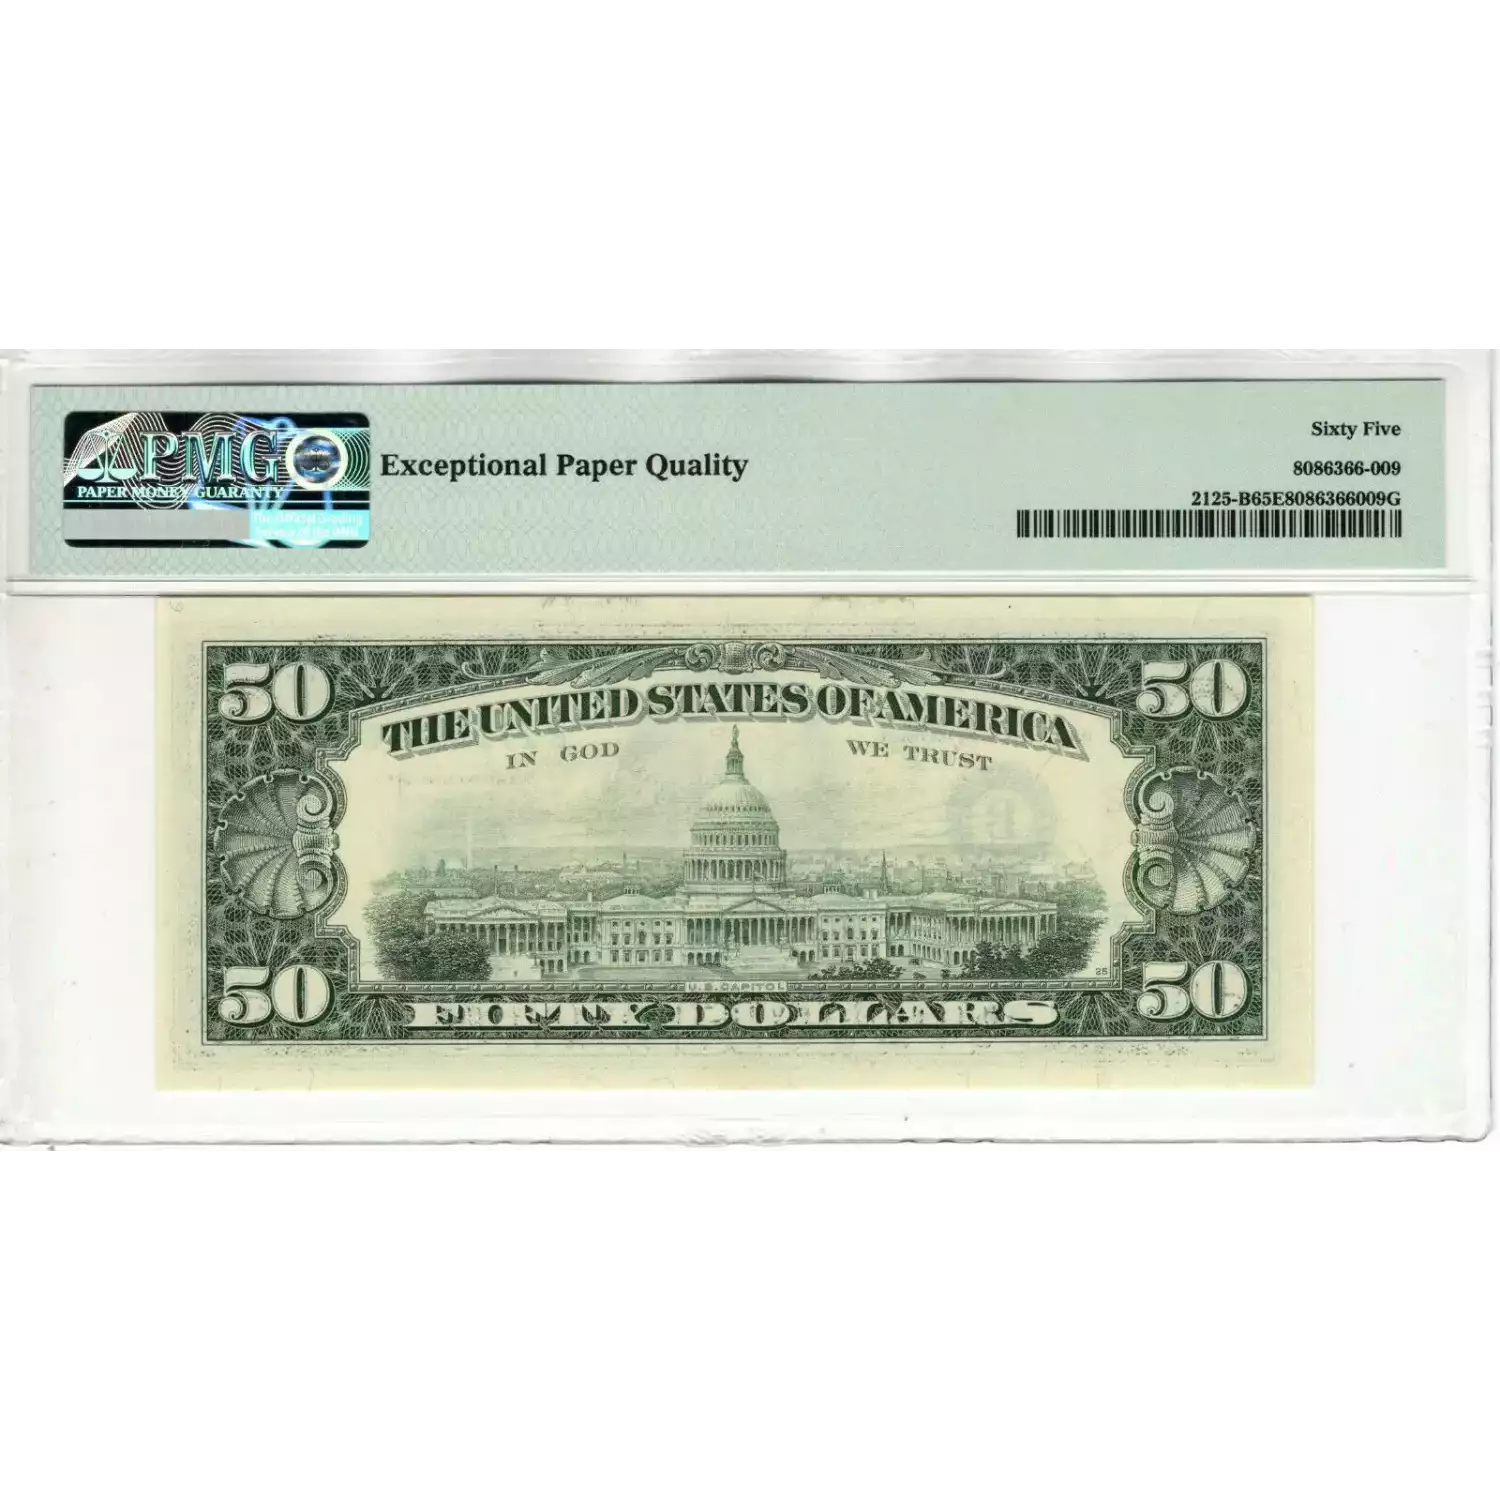 $50 1993 blue-Green seal. Small Size $50 Federal Reserve Notes 2125-B (2)